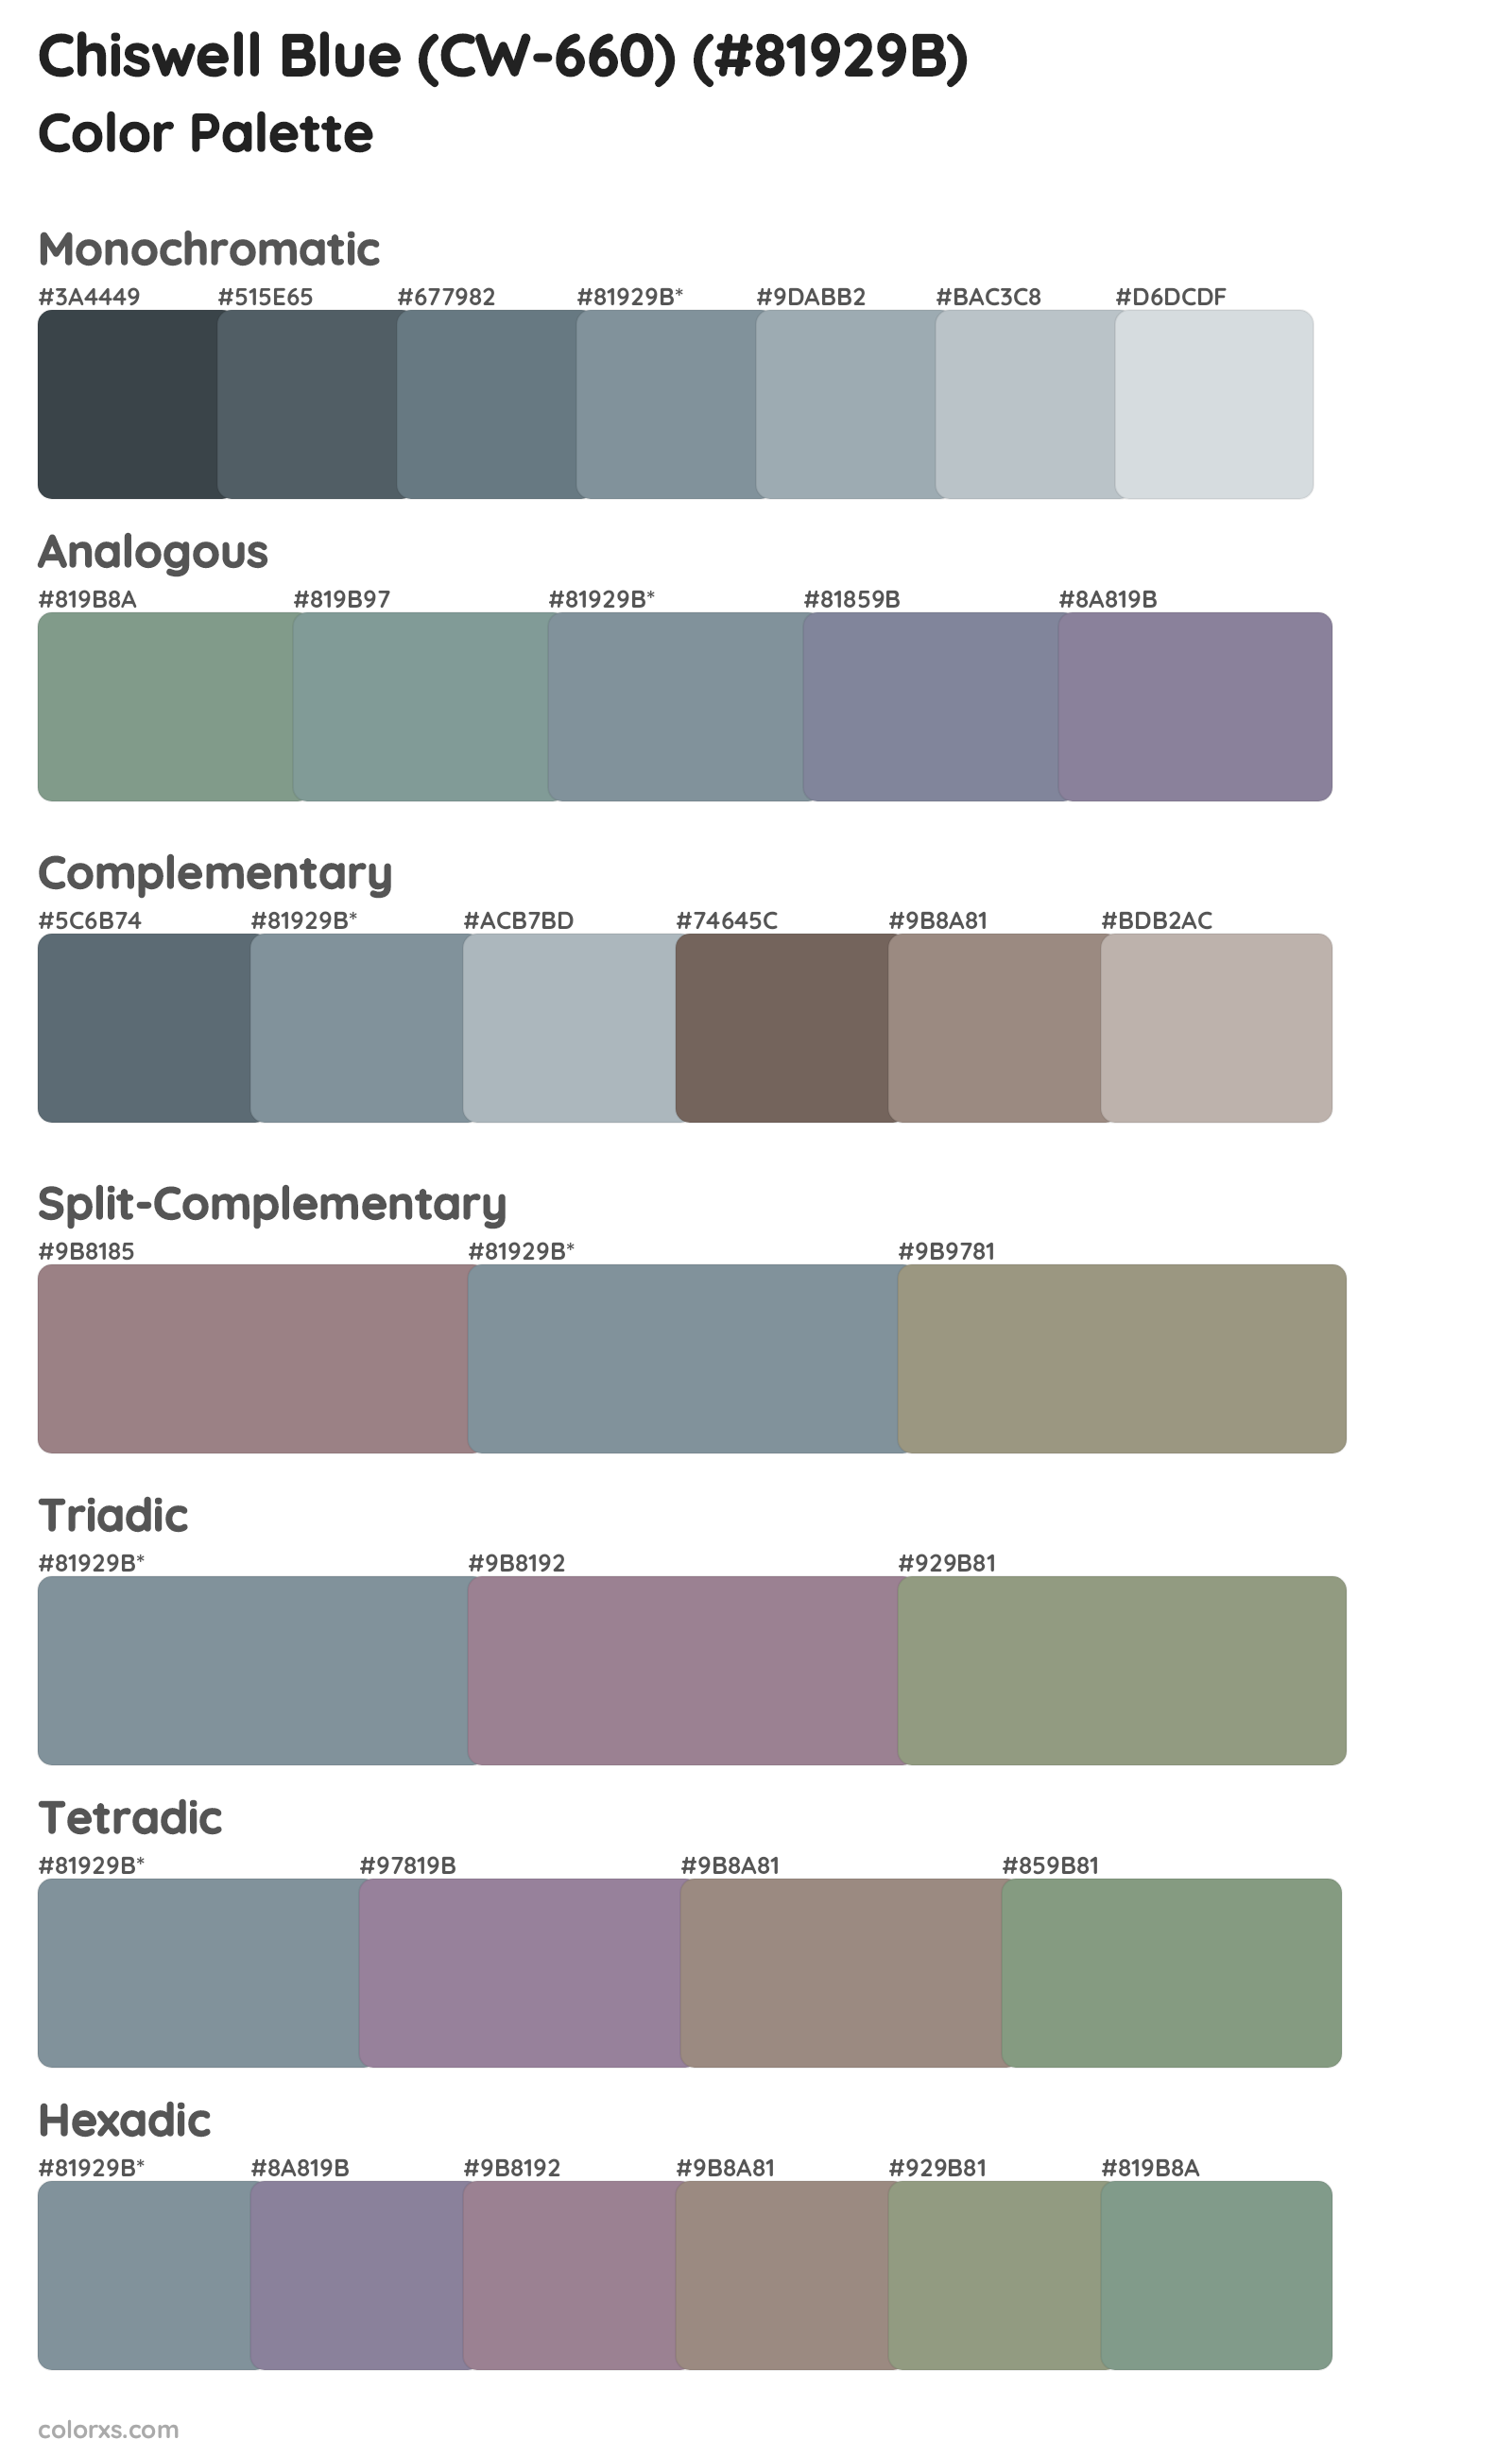 Chiswell Blue (CW-660) Color Scheme Palettes